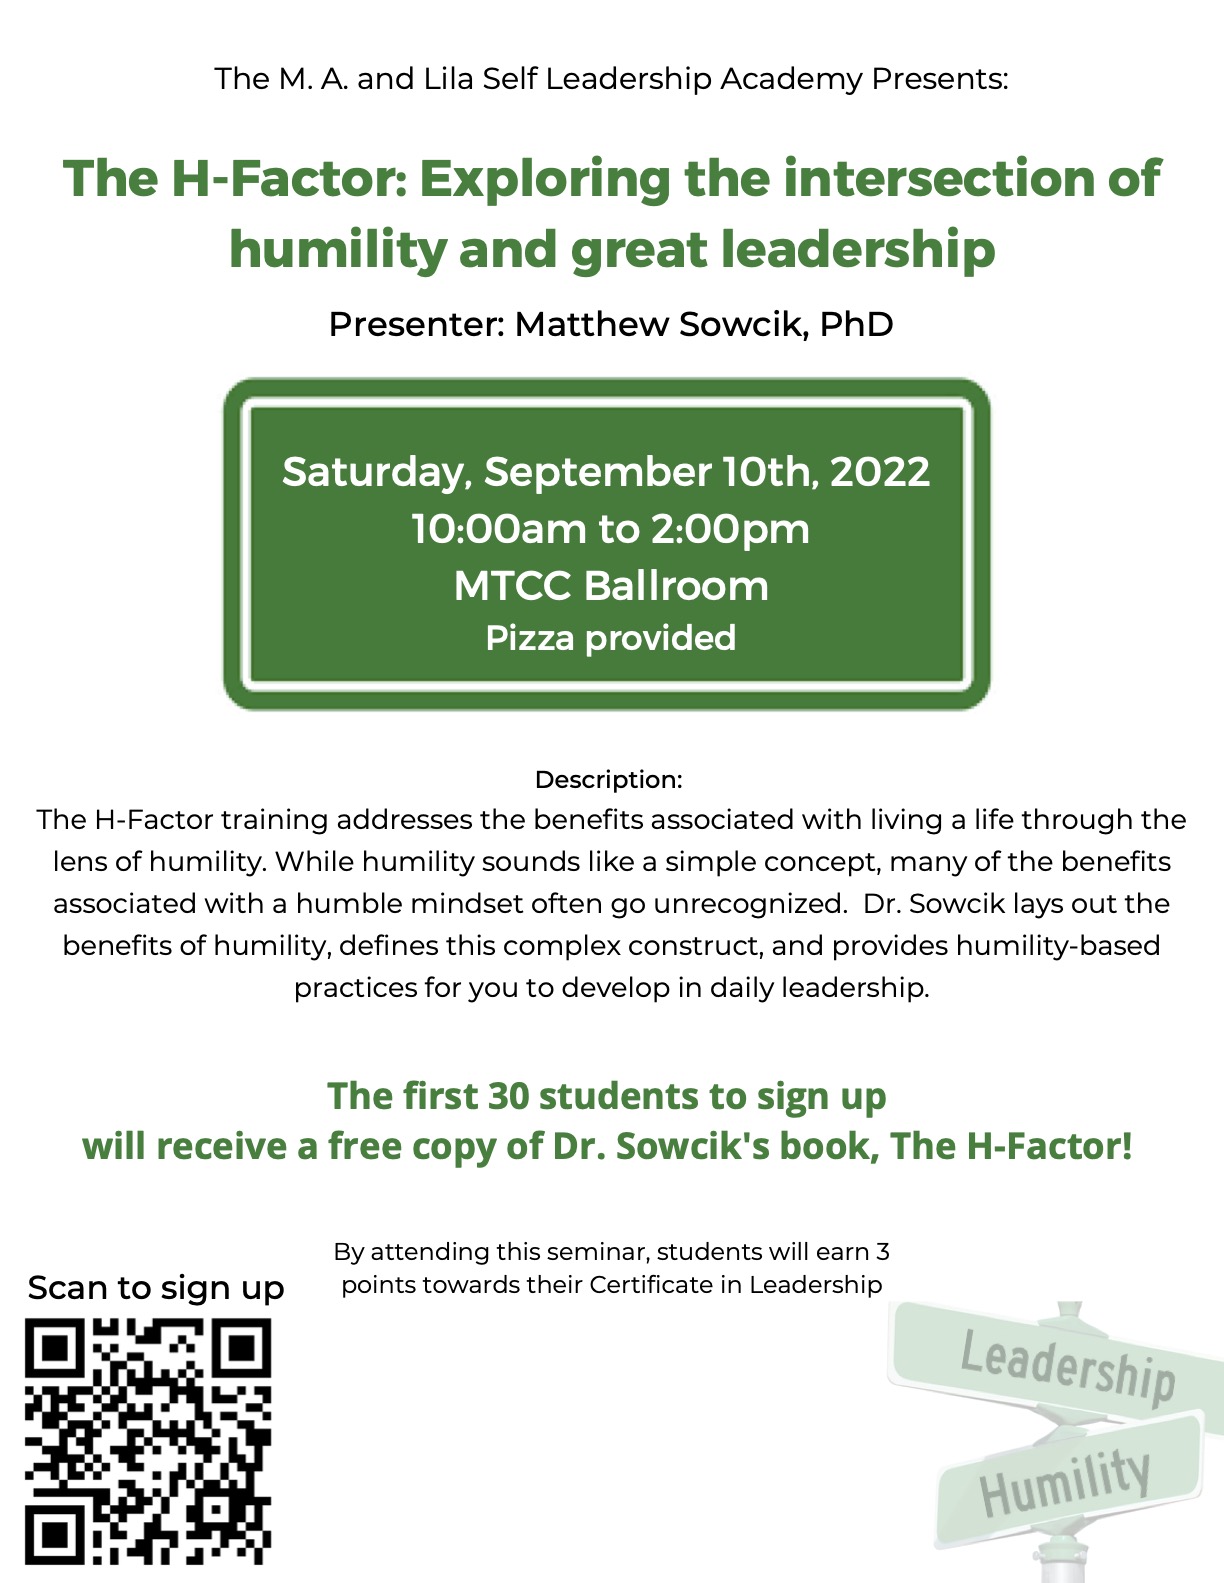 Leadership Academy Seminar # 1 - The H-Factor: Exploring the intersection of humility and great leadership